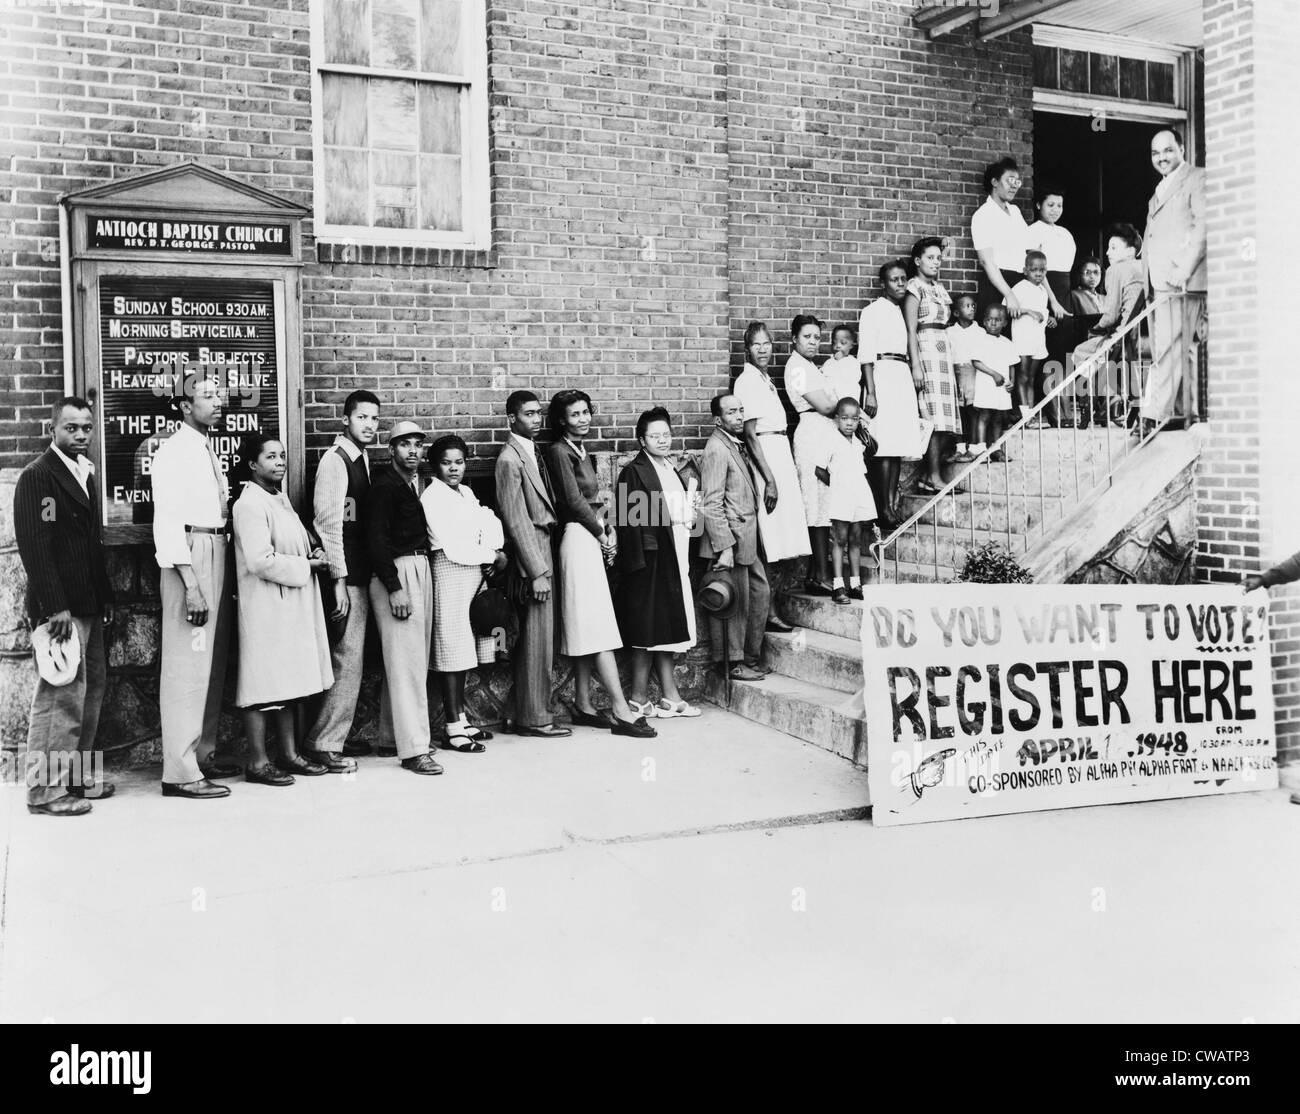 African American men and women wait in line for voter registration, at the Antioch Baptist Church in 1948 (location unknown). Stock Photo